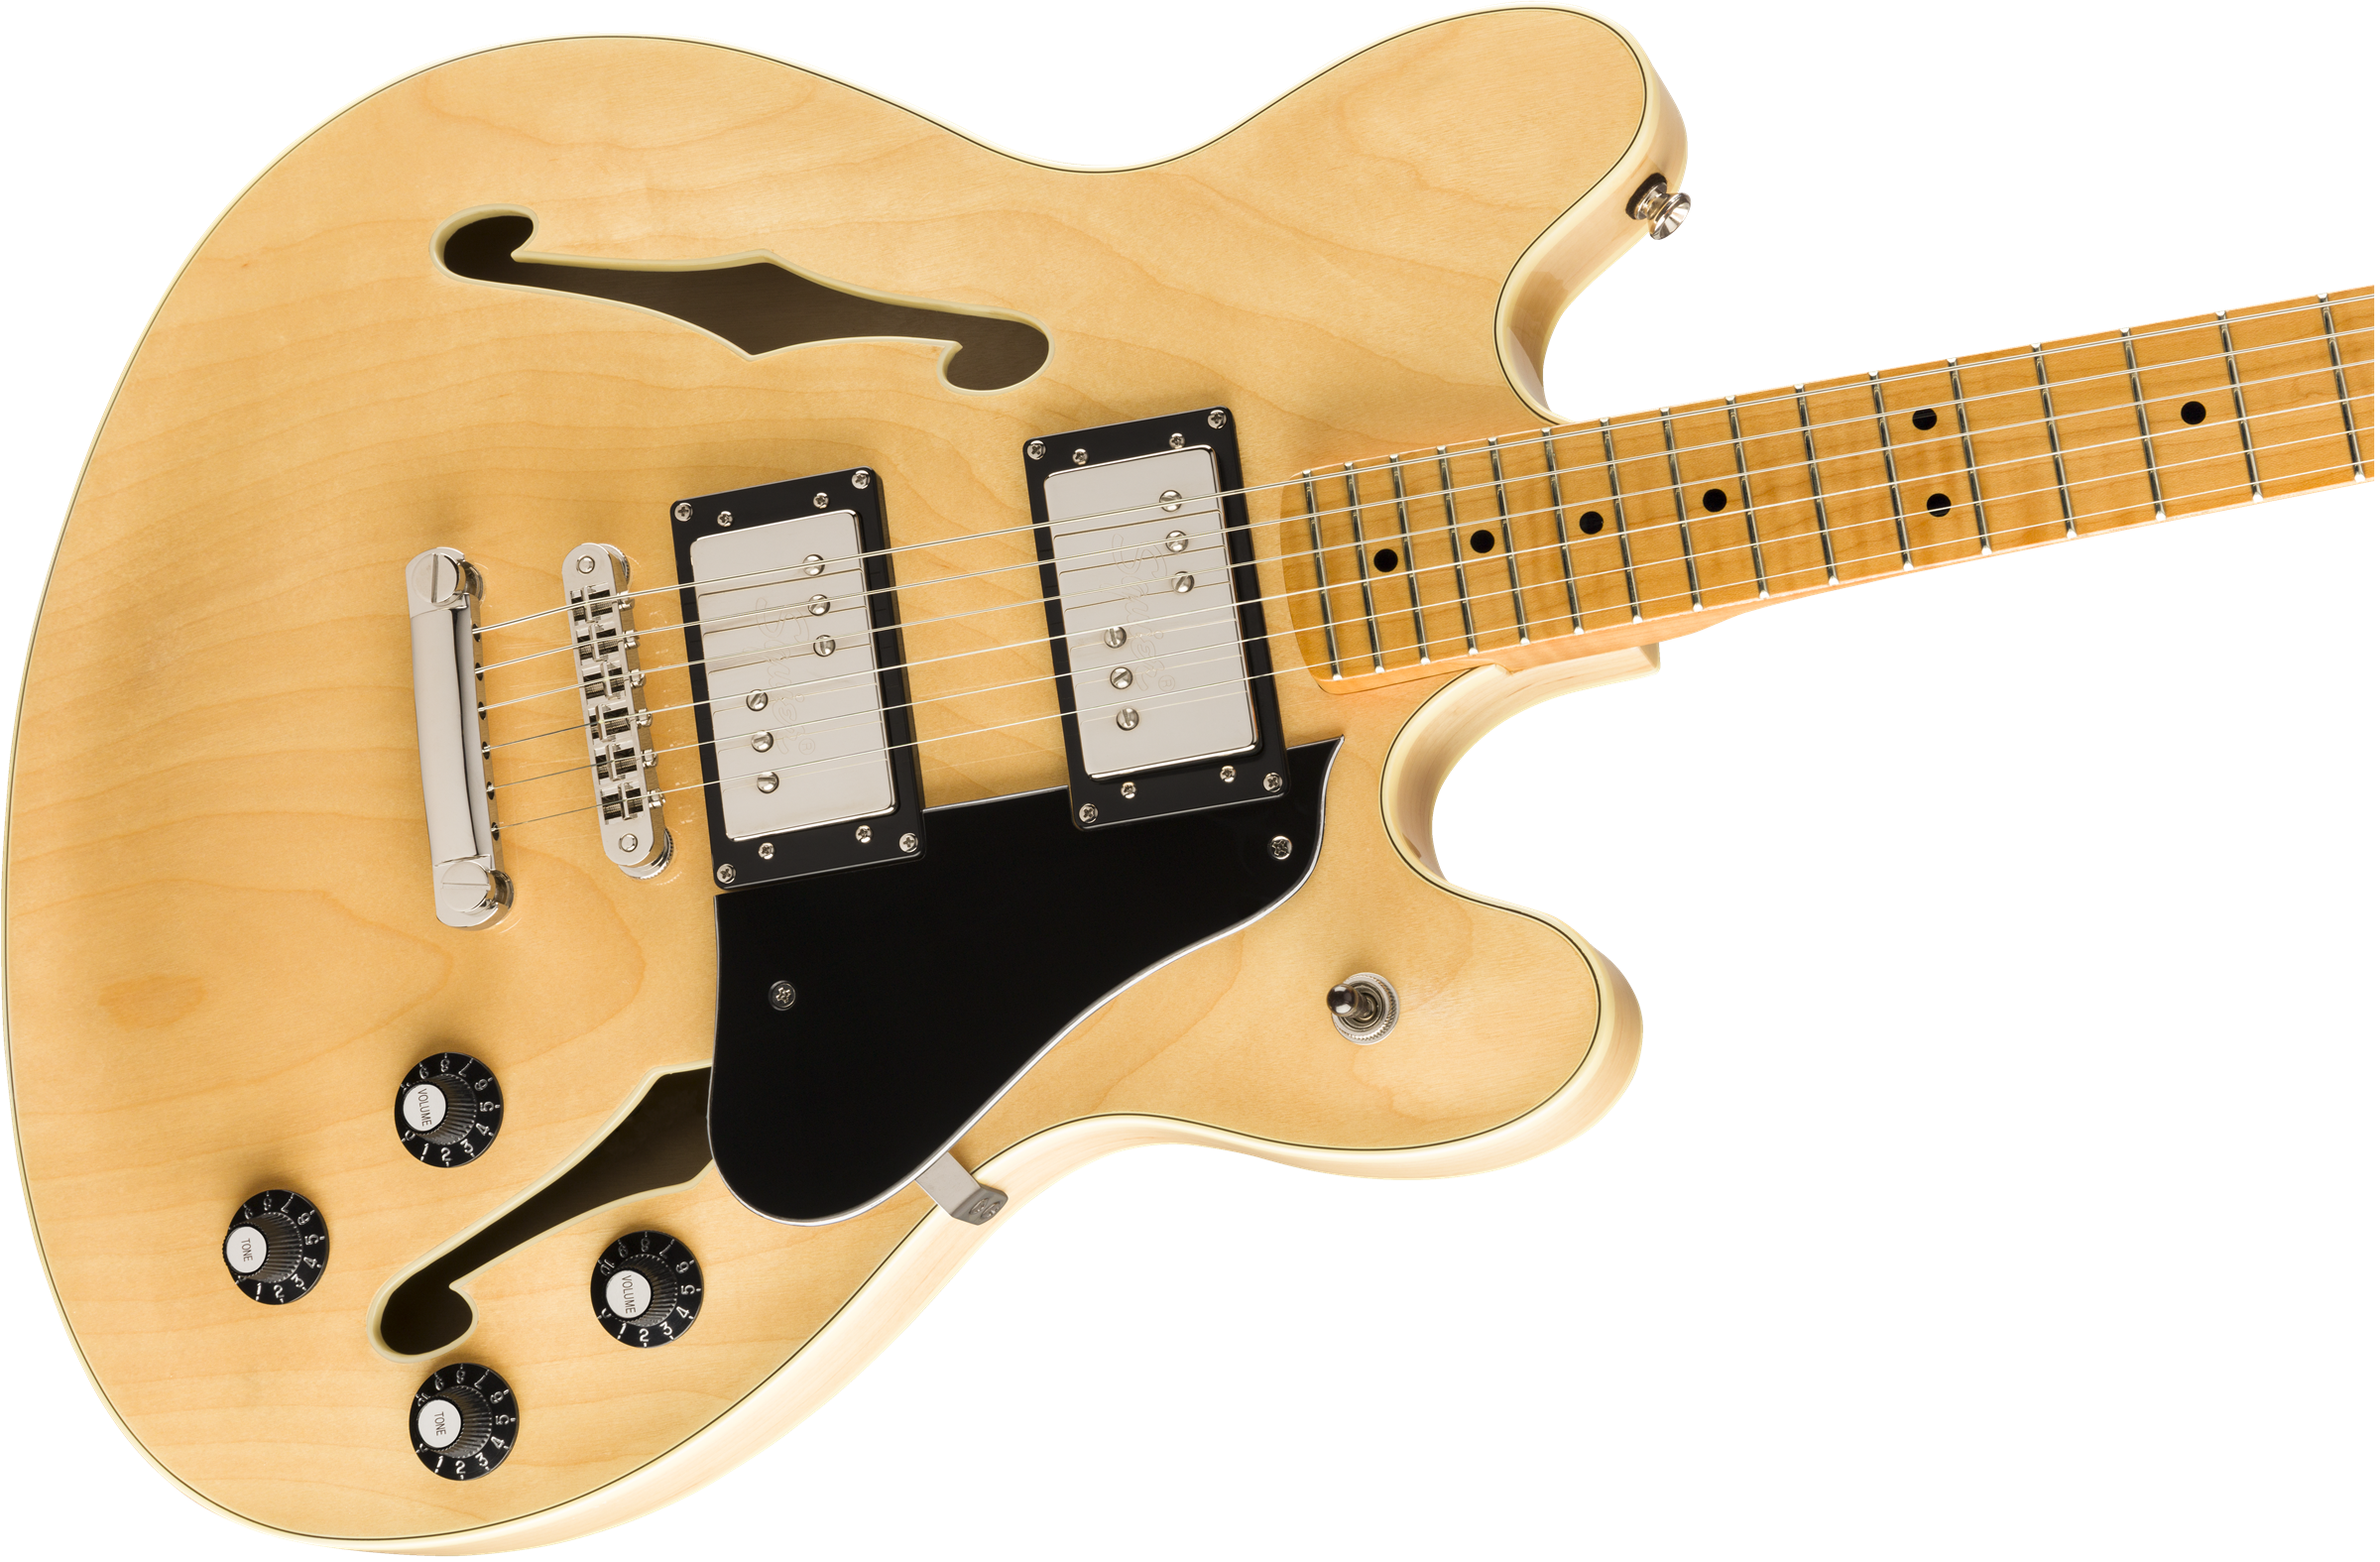 SQUIER Classic Vibe Starcaster Maple Fingerbaord Natural 0374590521